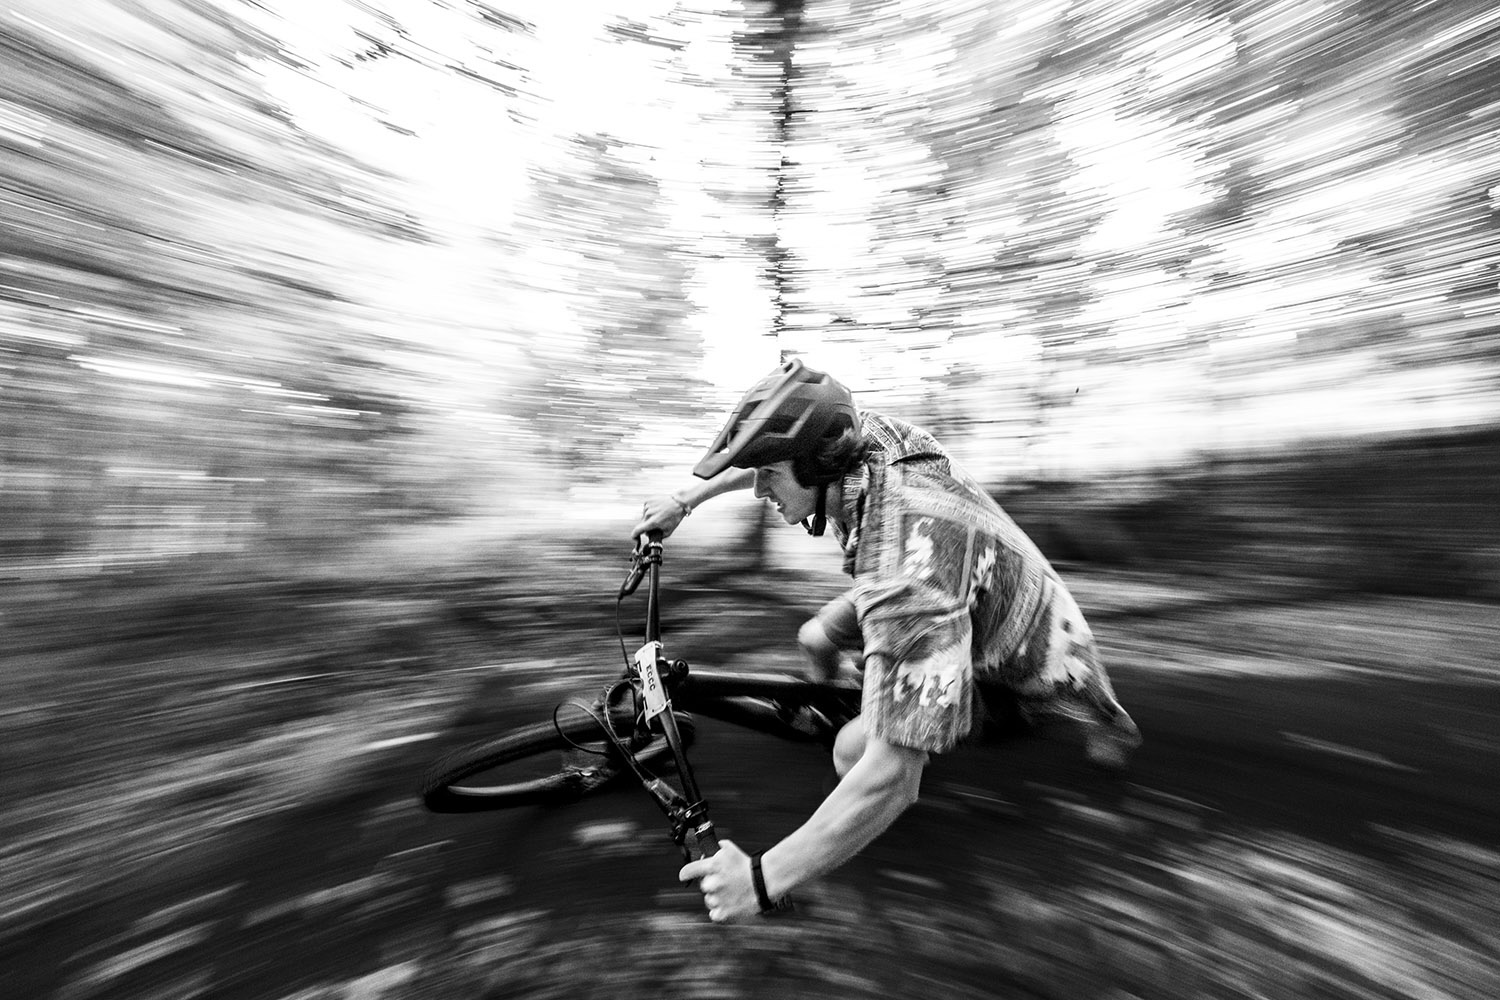 a black and white photograph of a racing bike rider in full motion heading around a banked surface, gripping the handle bars and the background in a motion blur.